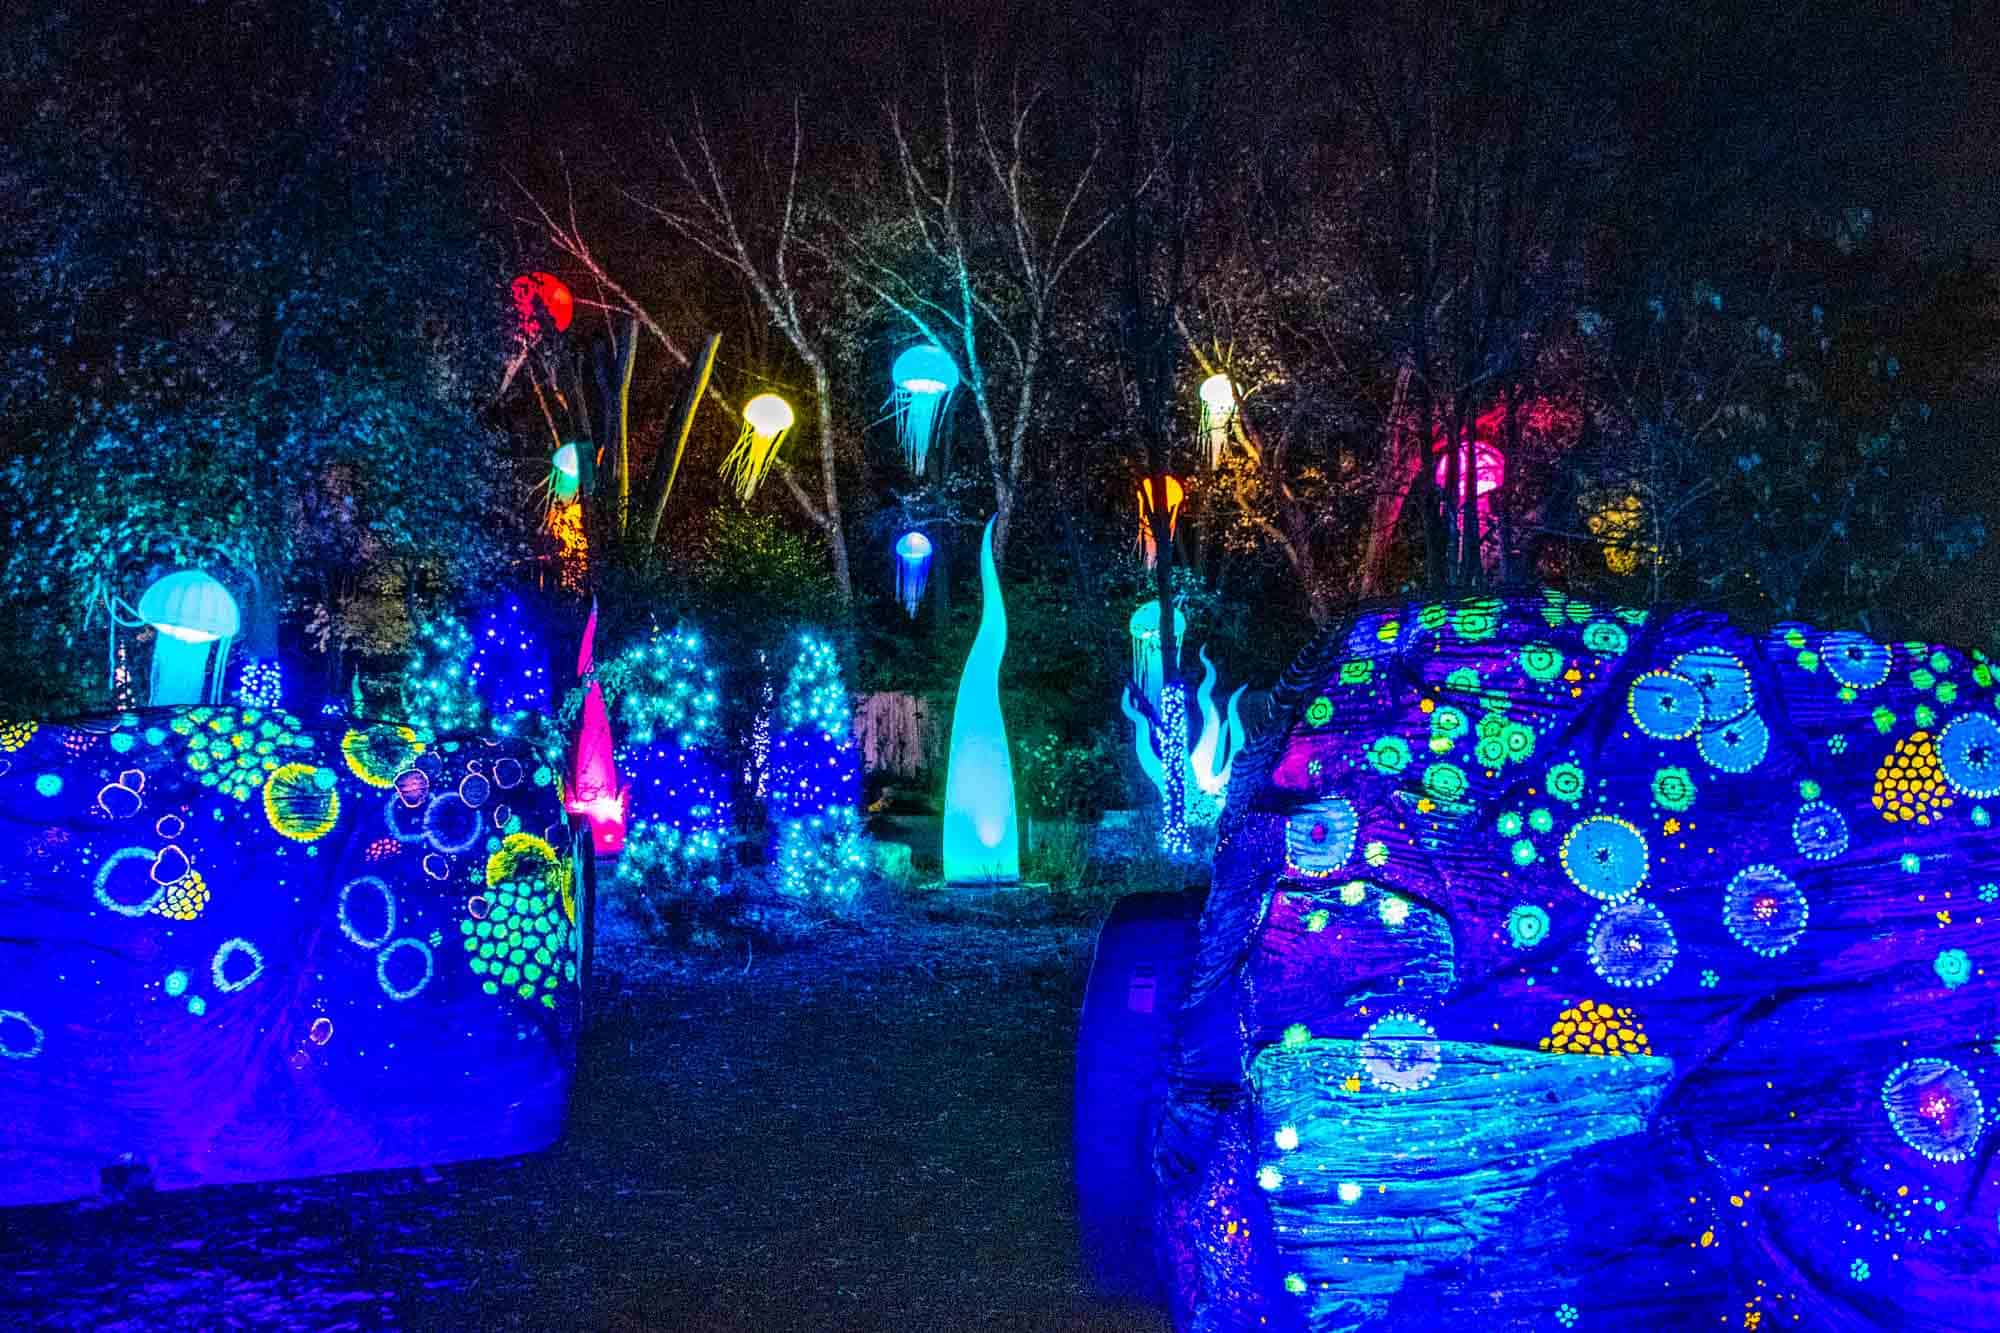 Rocks glowing in blacklights with large illuminated jellyfish in the background